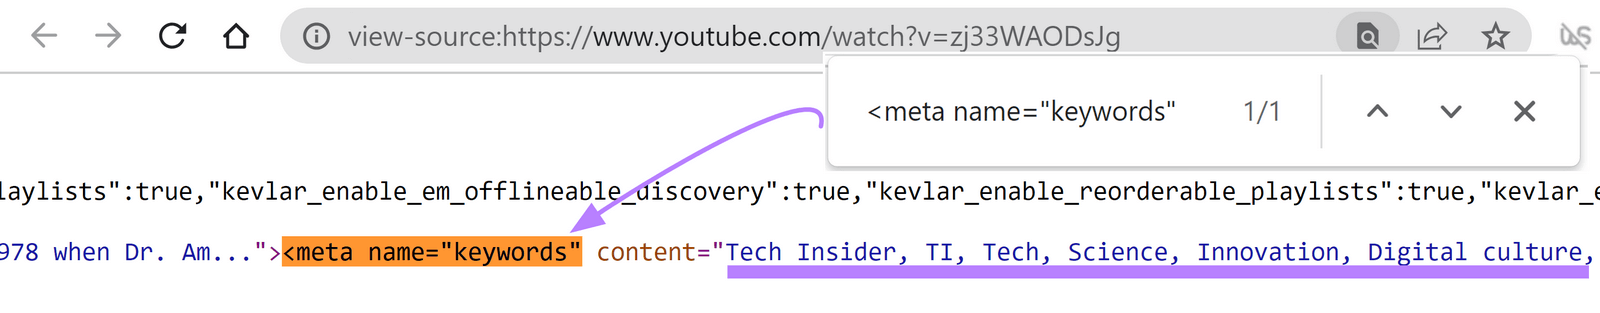 Results for <meta name=“keywords” search in HTML source code.